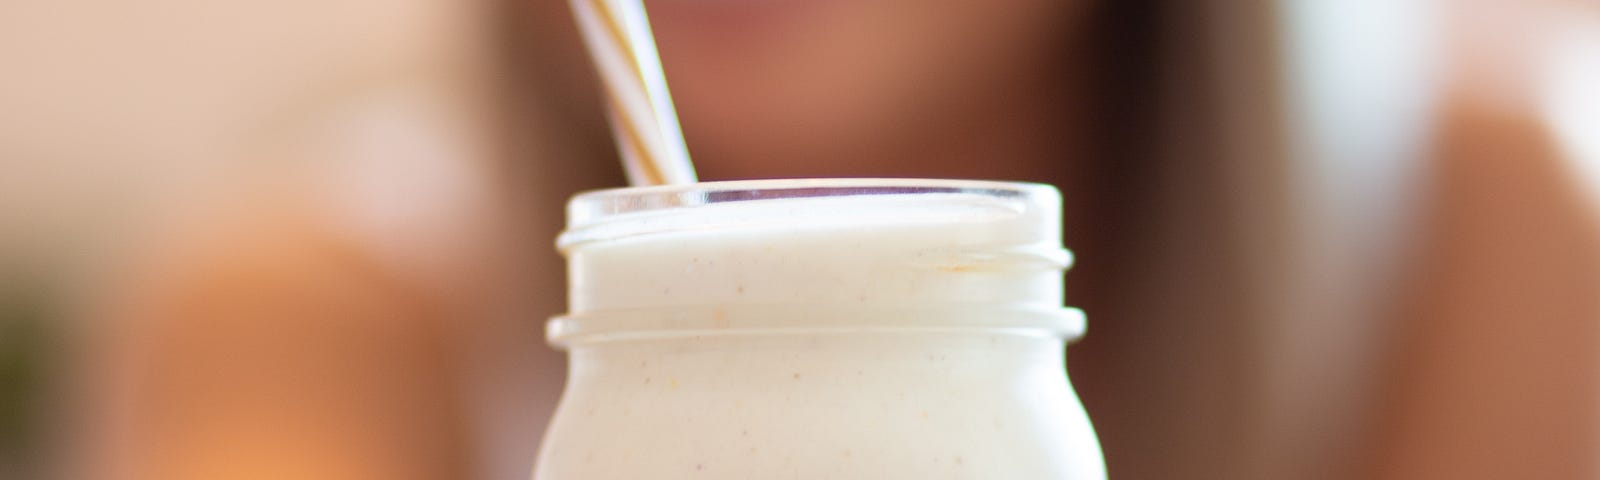 Jar of milk with a straw in it, held by lady whose image is blurred image. Age slower with low-fat cow milk.